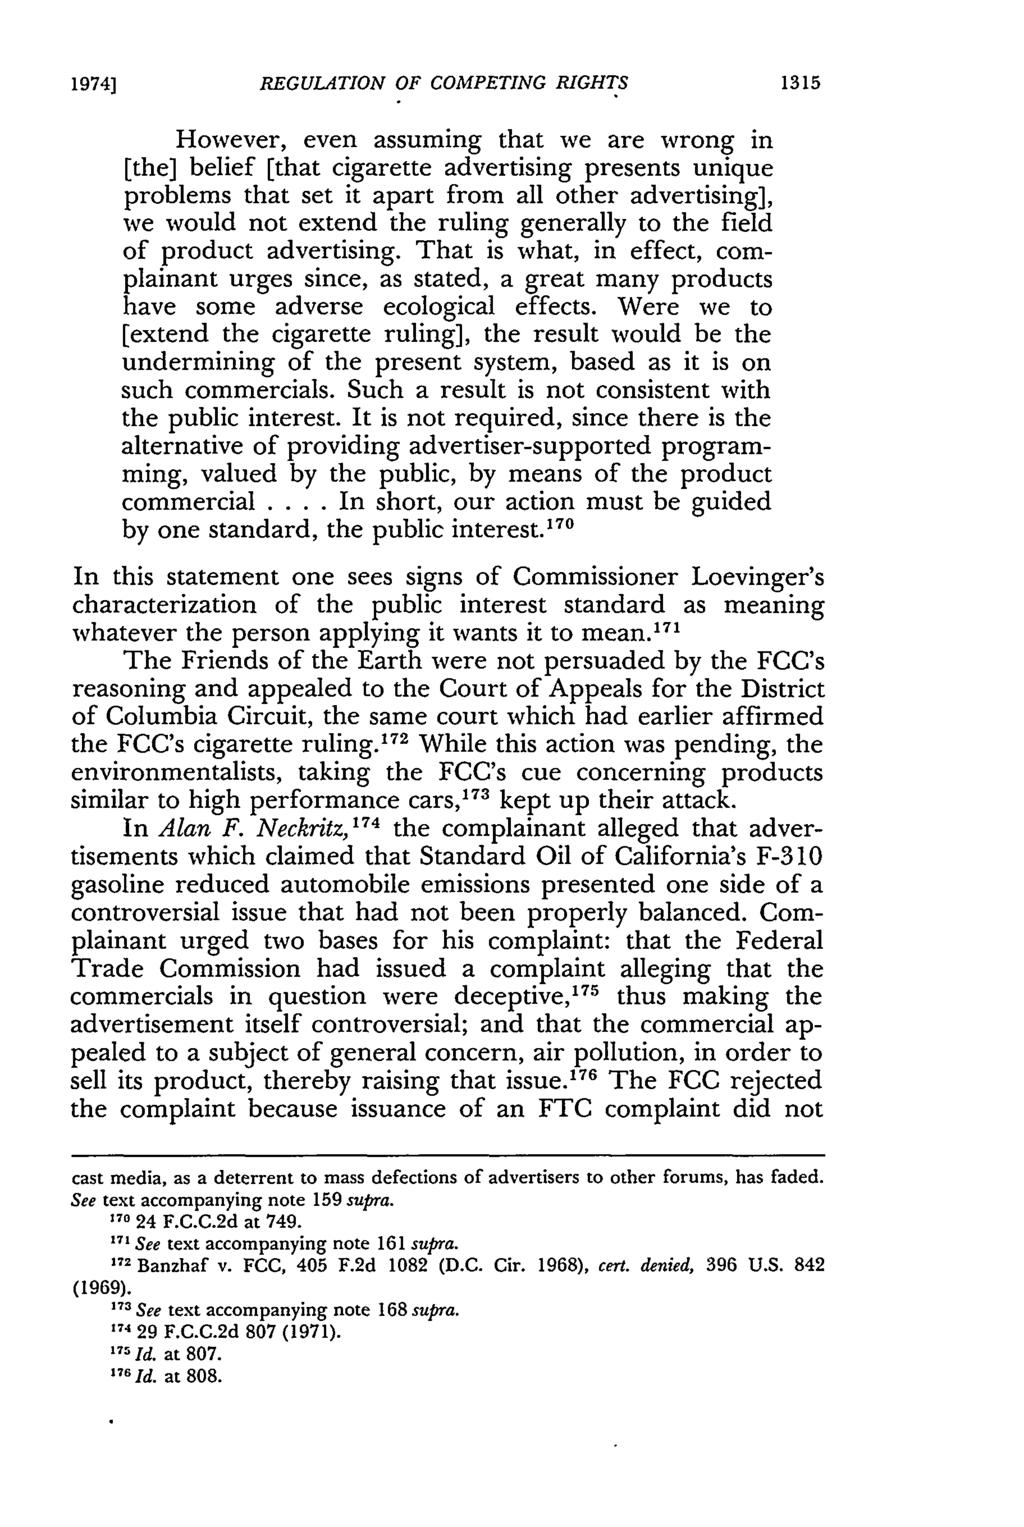 1974] REGULATION OF COMPETING RIGHTS However, even assuming that we are wrong in [the] belief [that cigarette advertising presents unique problems that set it apart from all other advertising], we